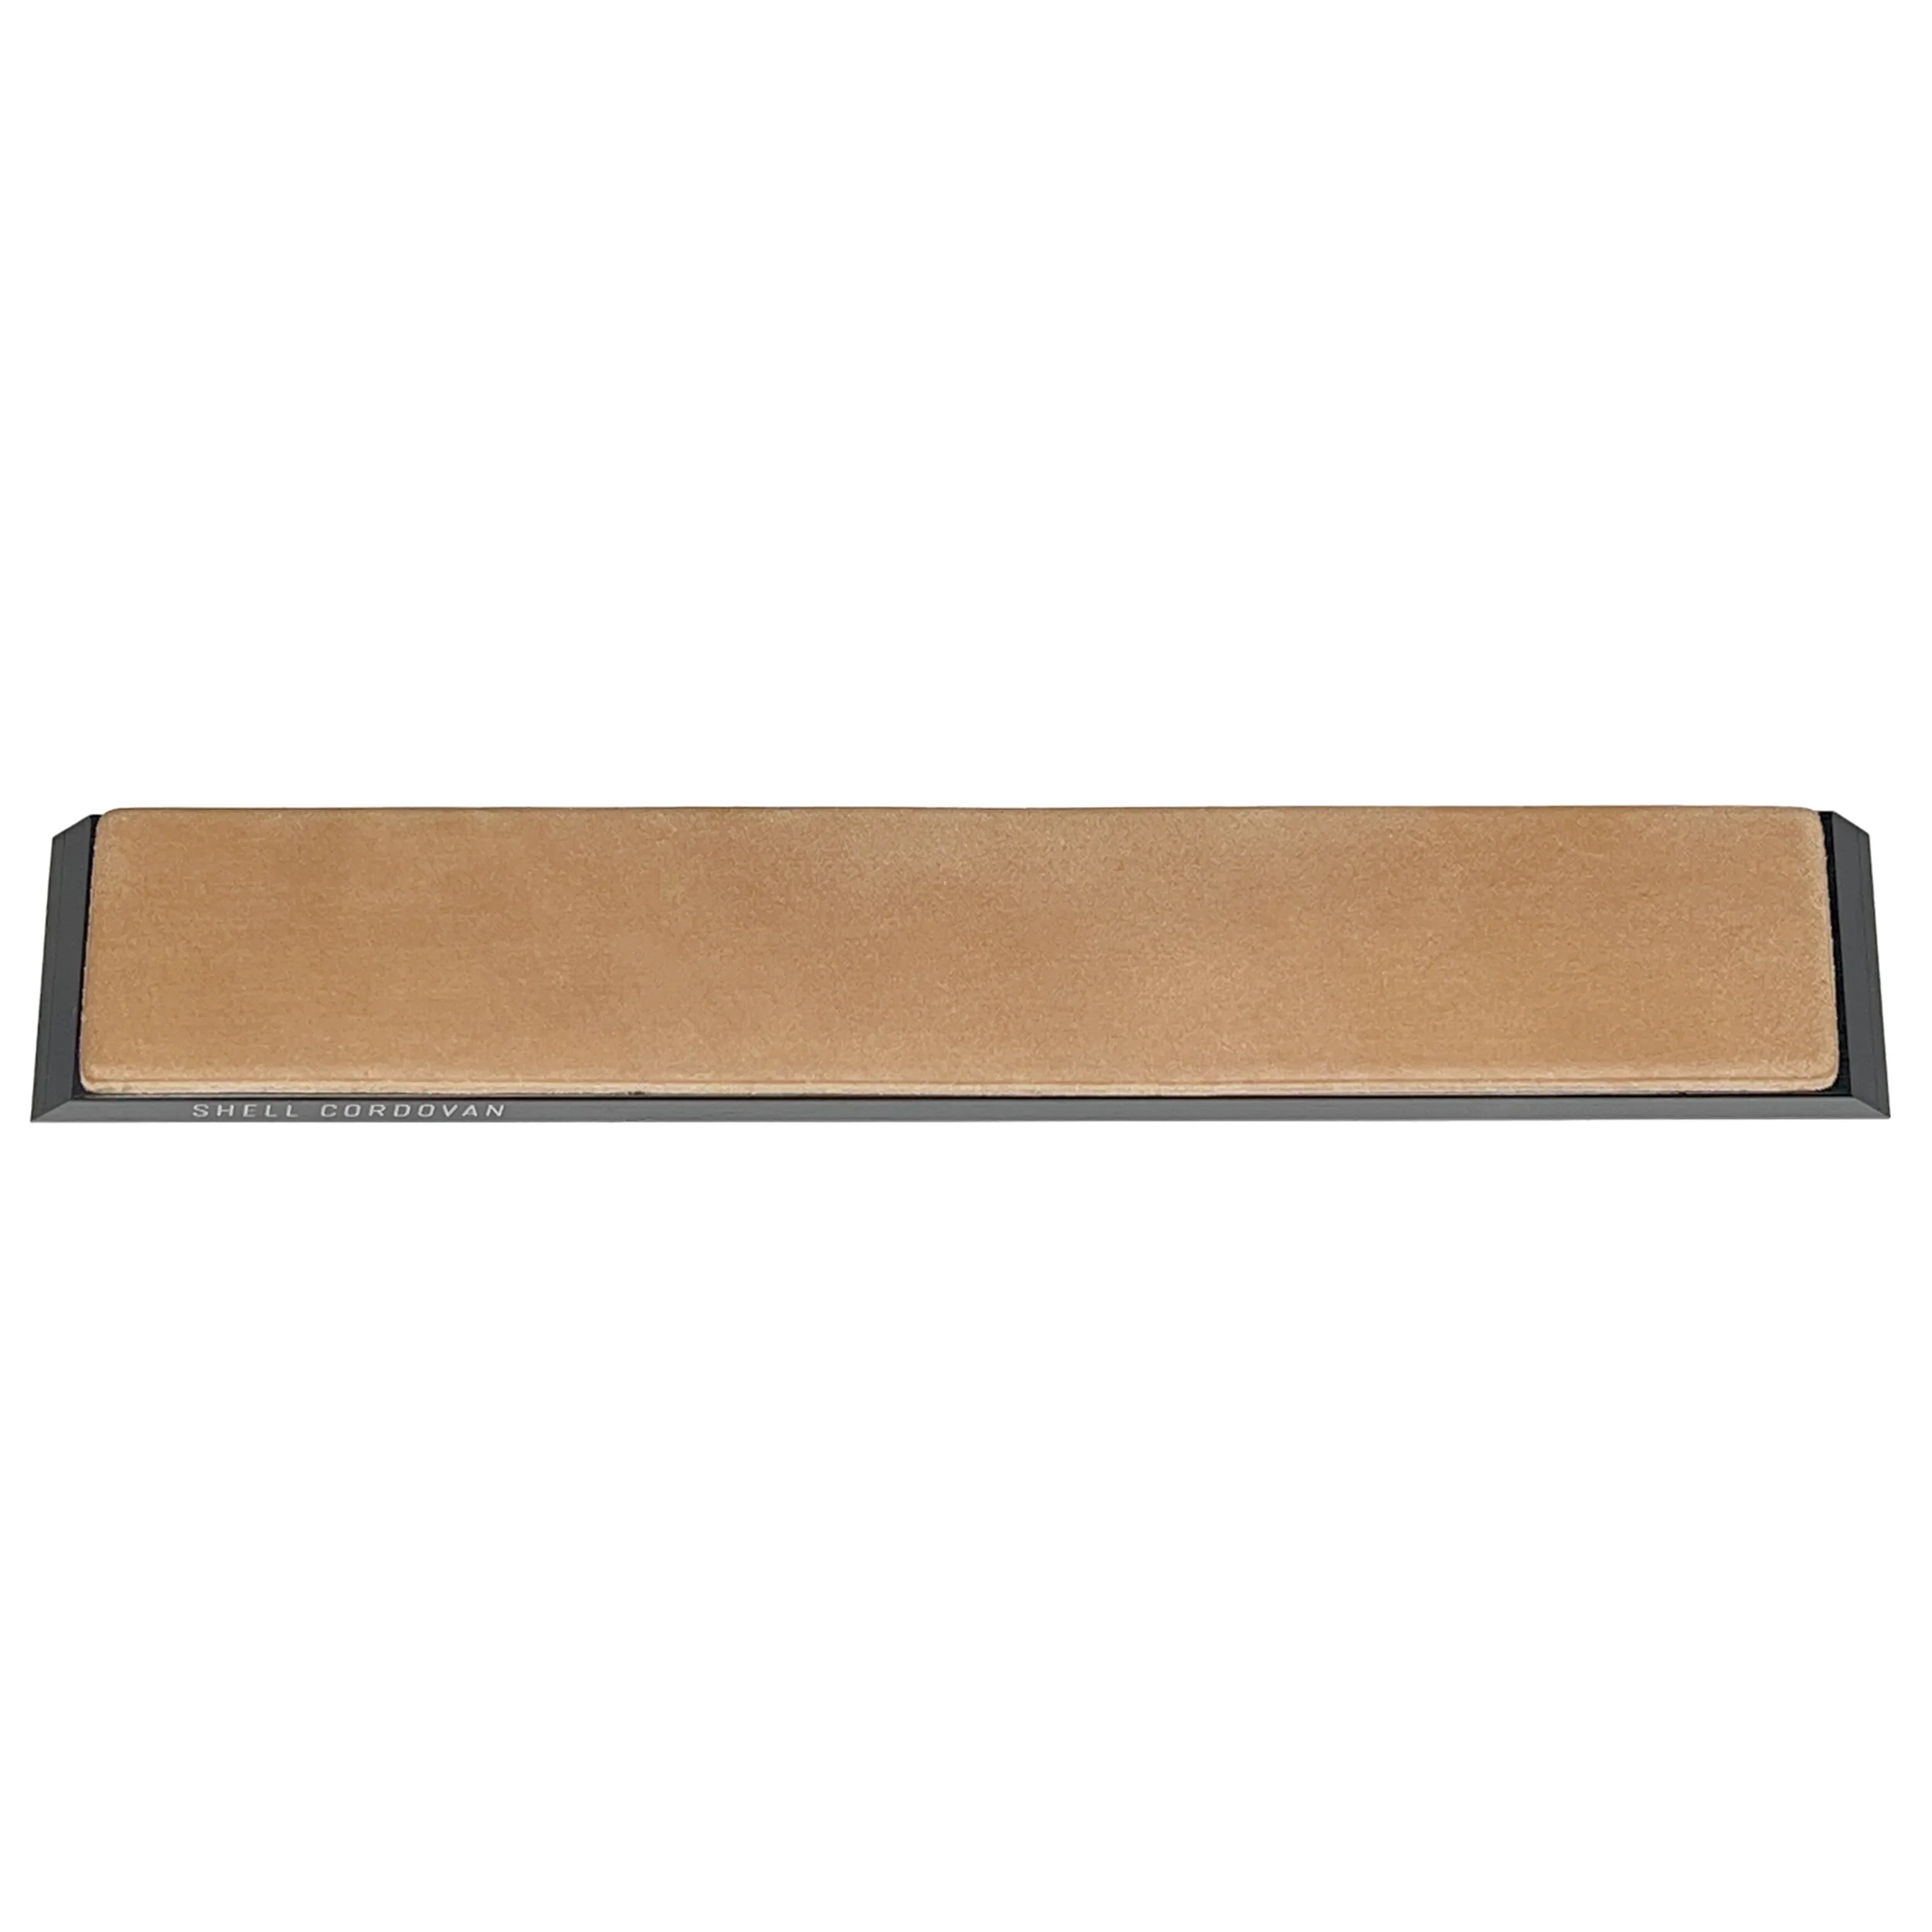 Shell Cordovan Leather Strop on Anodized Blank [6" x 1"] Questions & Answers